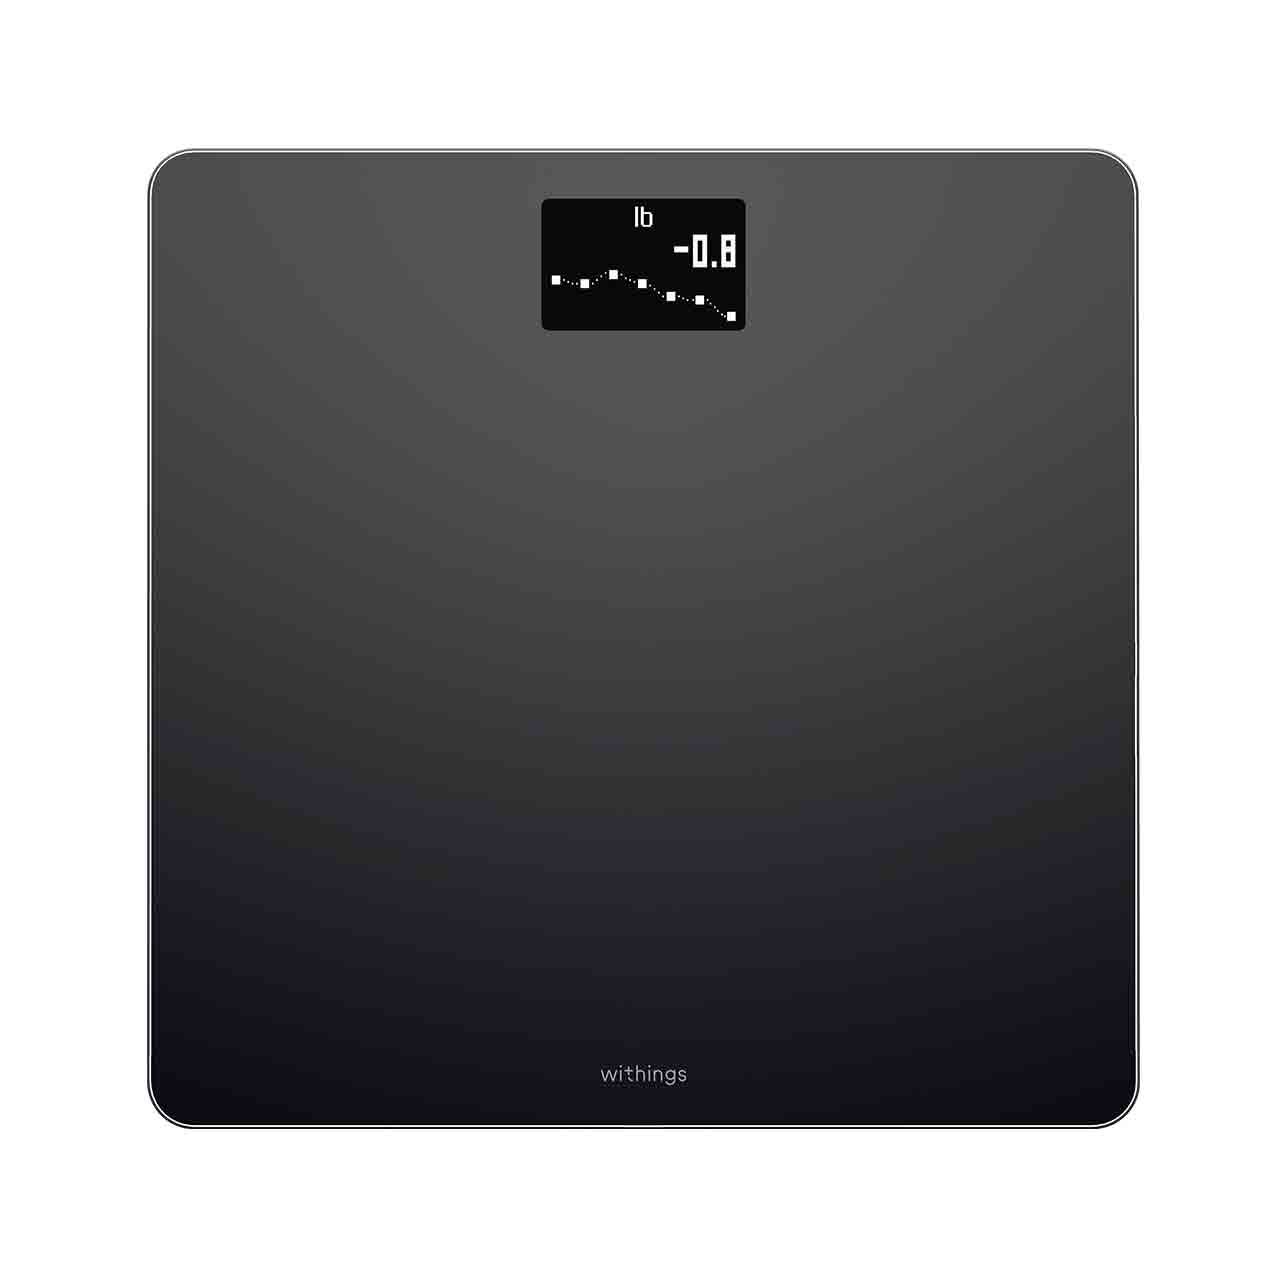 Withings Body (Nokia), Black - Weight & BMI Wi-Fi Scale - Wi-Fi sync, Multi-user, Pregnancy mode - Withings Official Store